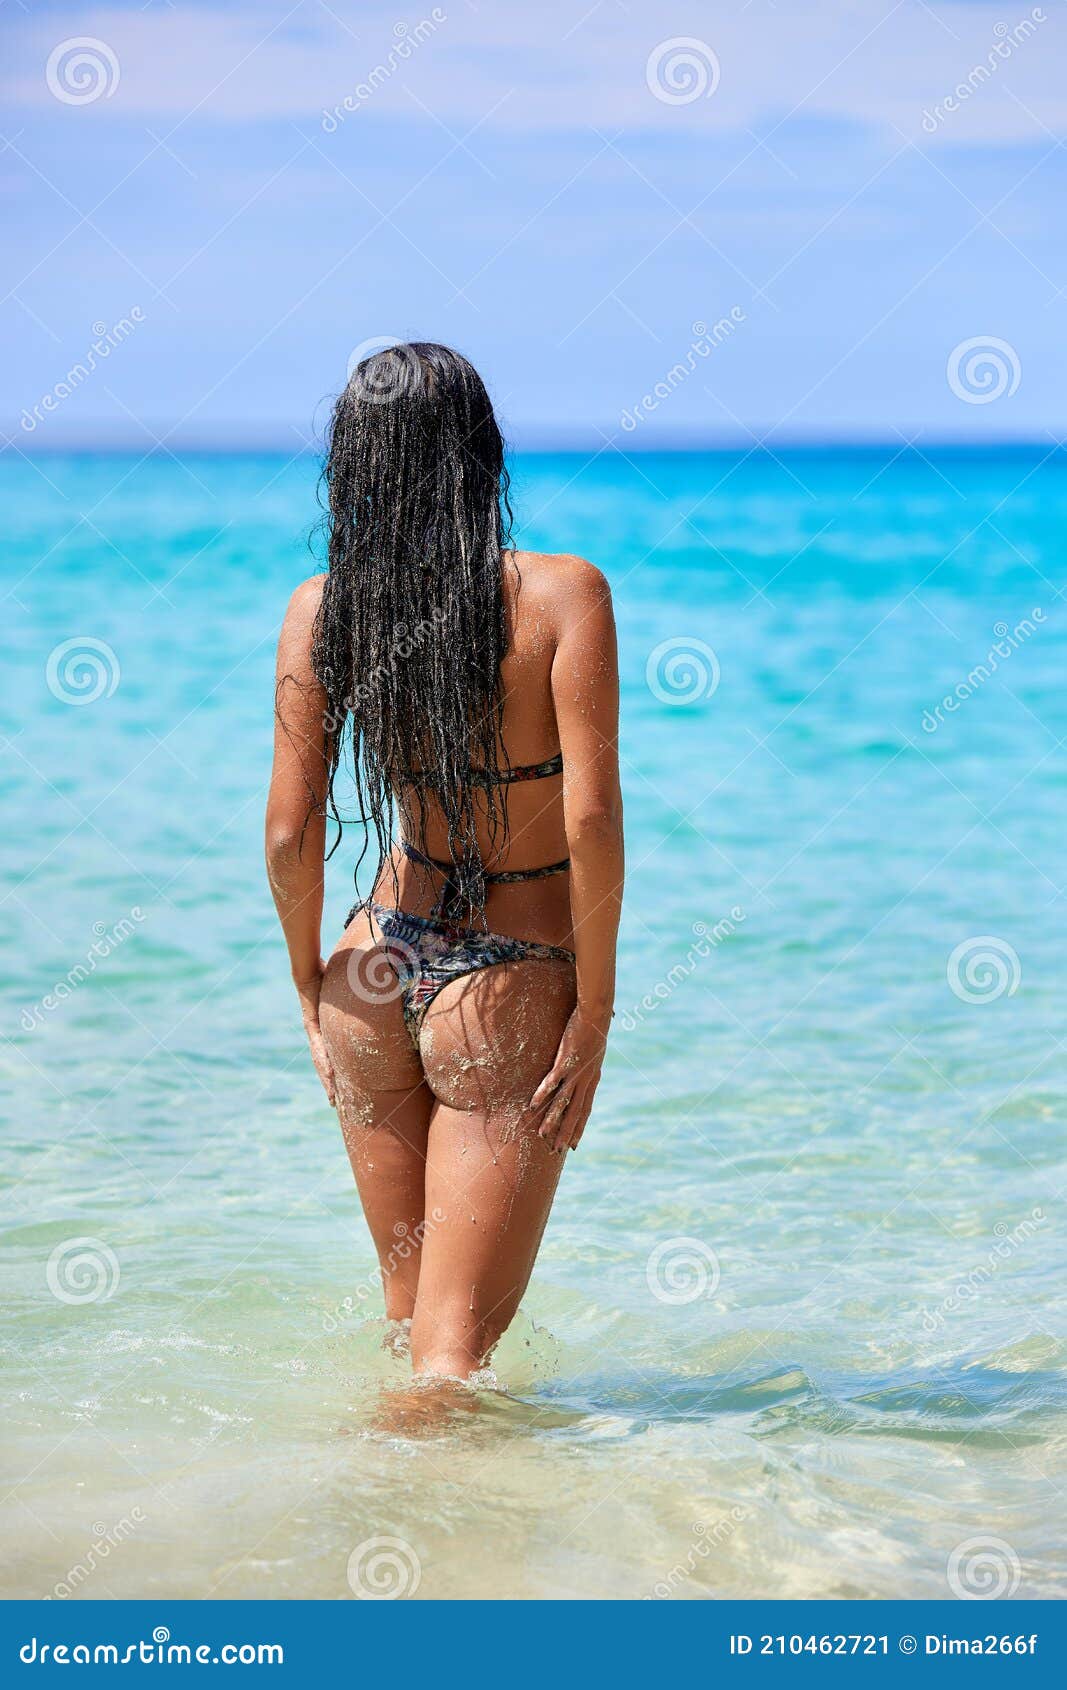 sexy wife on the beach hot photo